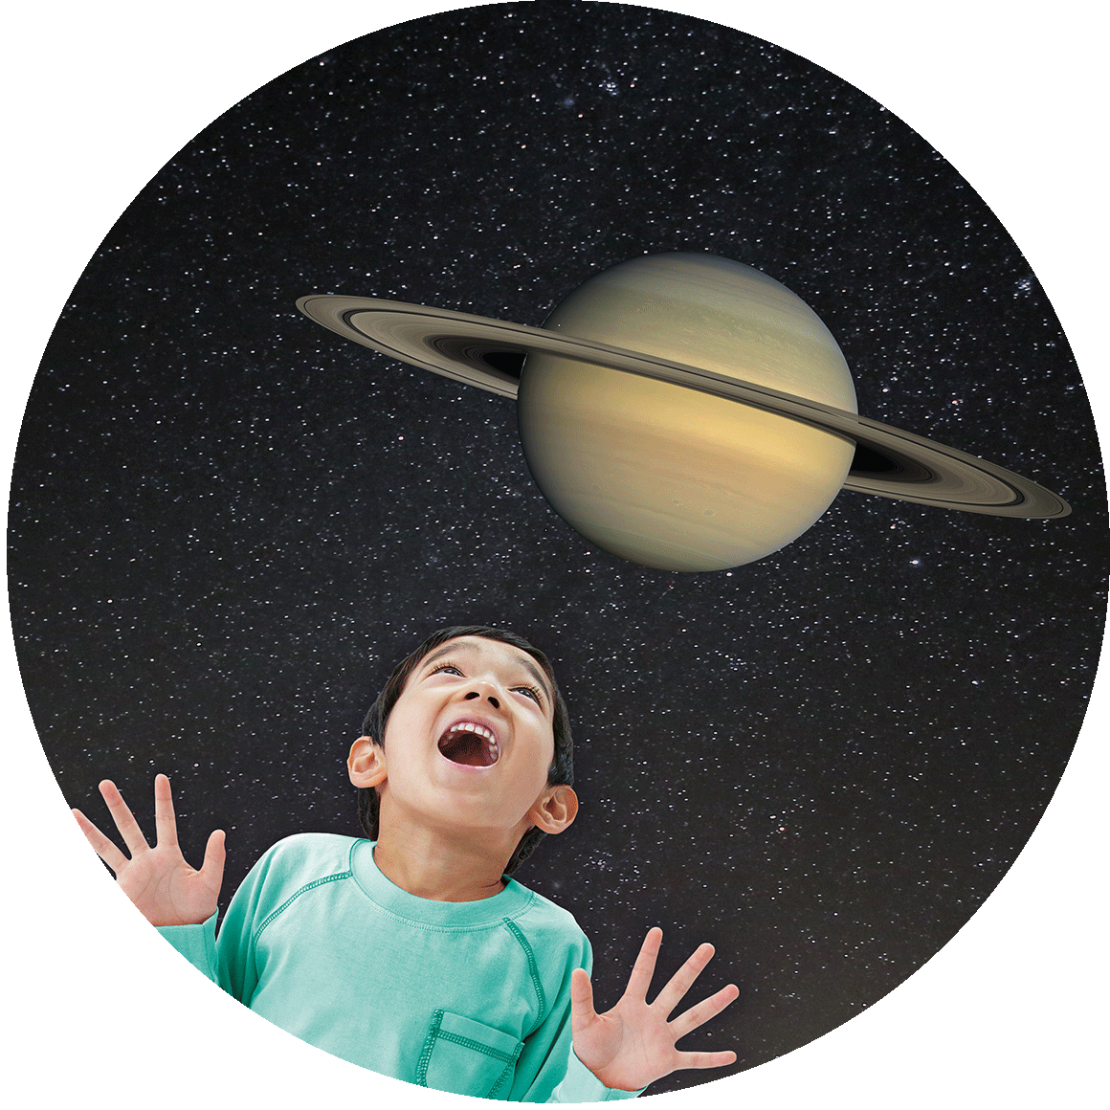 Boy and planet saturn